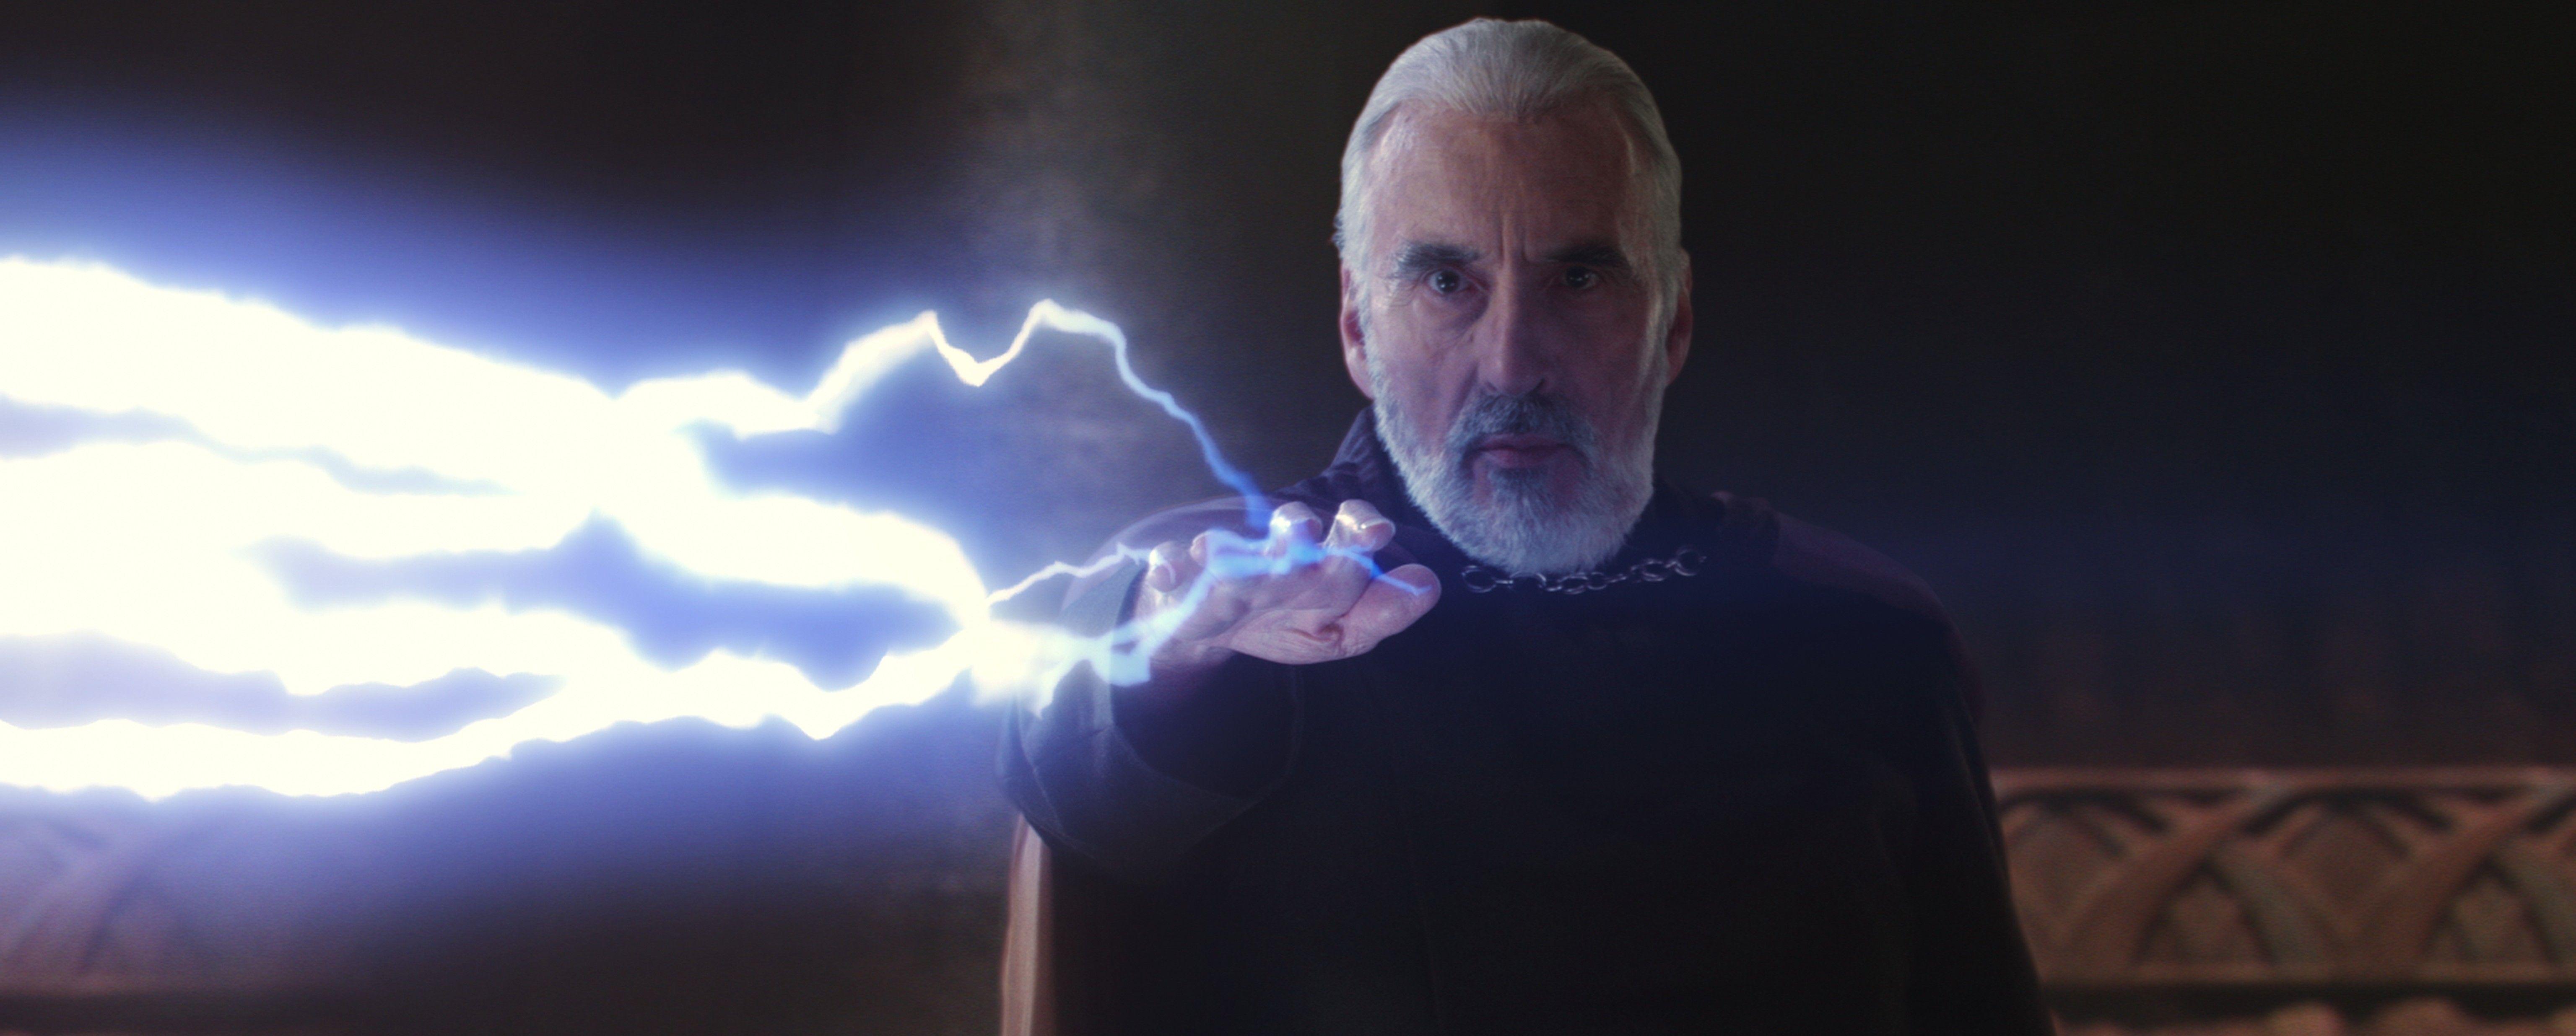 Count Dooku during his climactic battle with Yoda. Star Wars